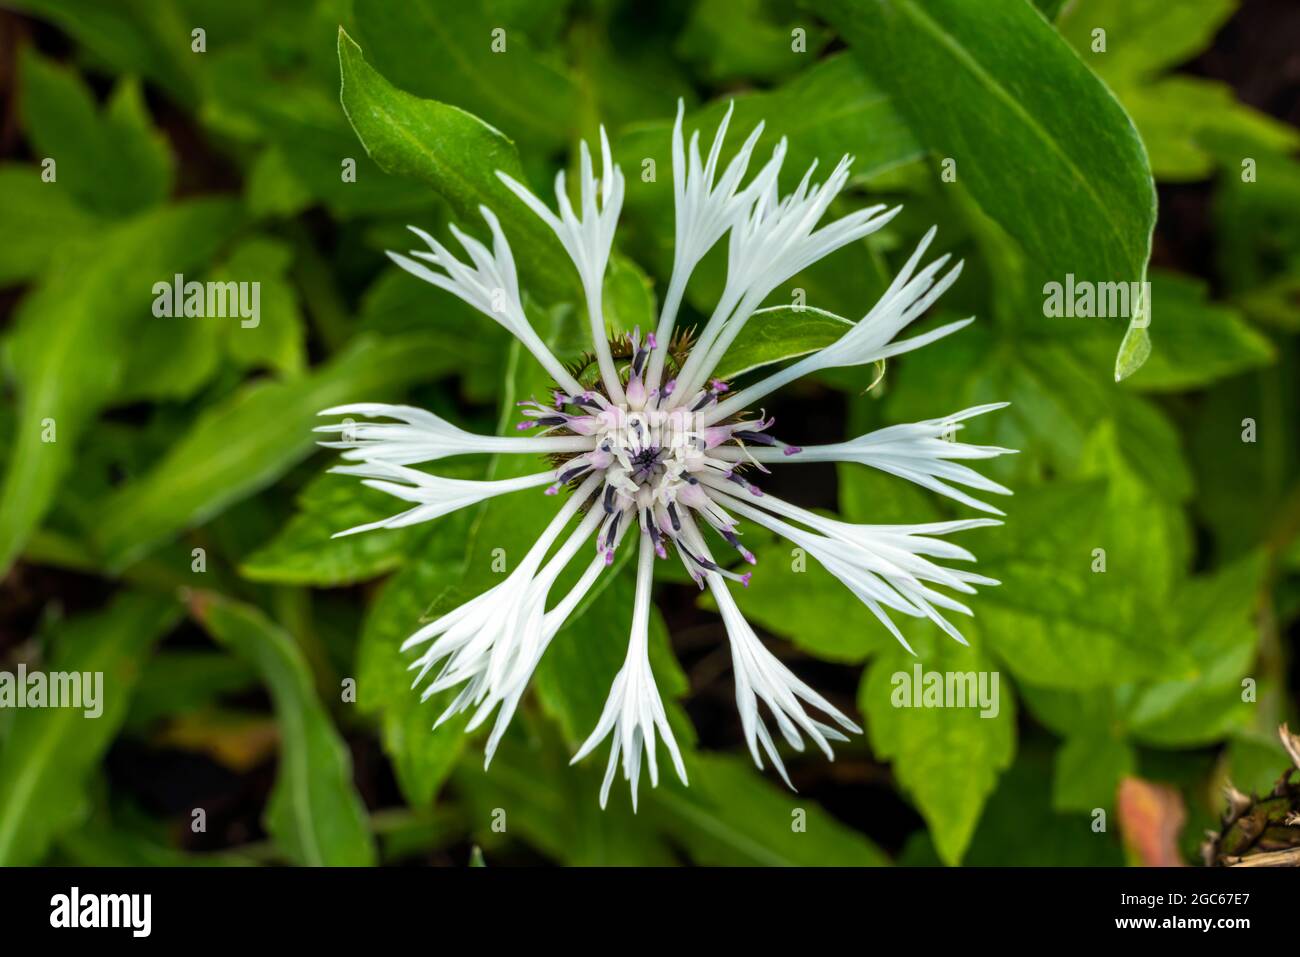 Centaurea montana 'Alaba' a summer flowering plant with a ragged petalled summertime flower commonly known as white perennial cornflower, stock photo Stock Photo